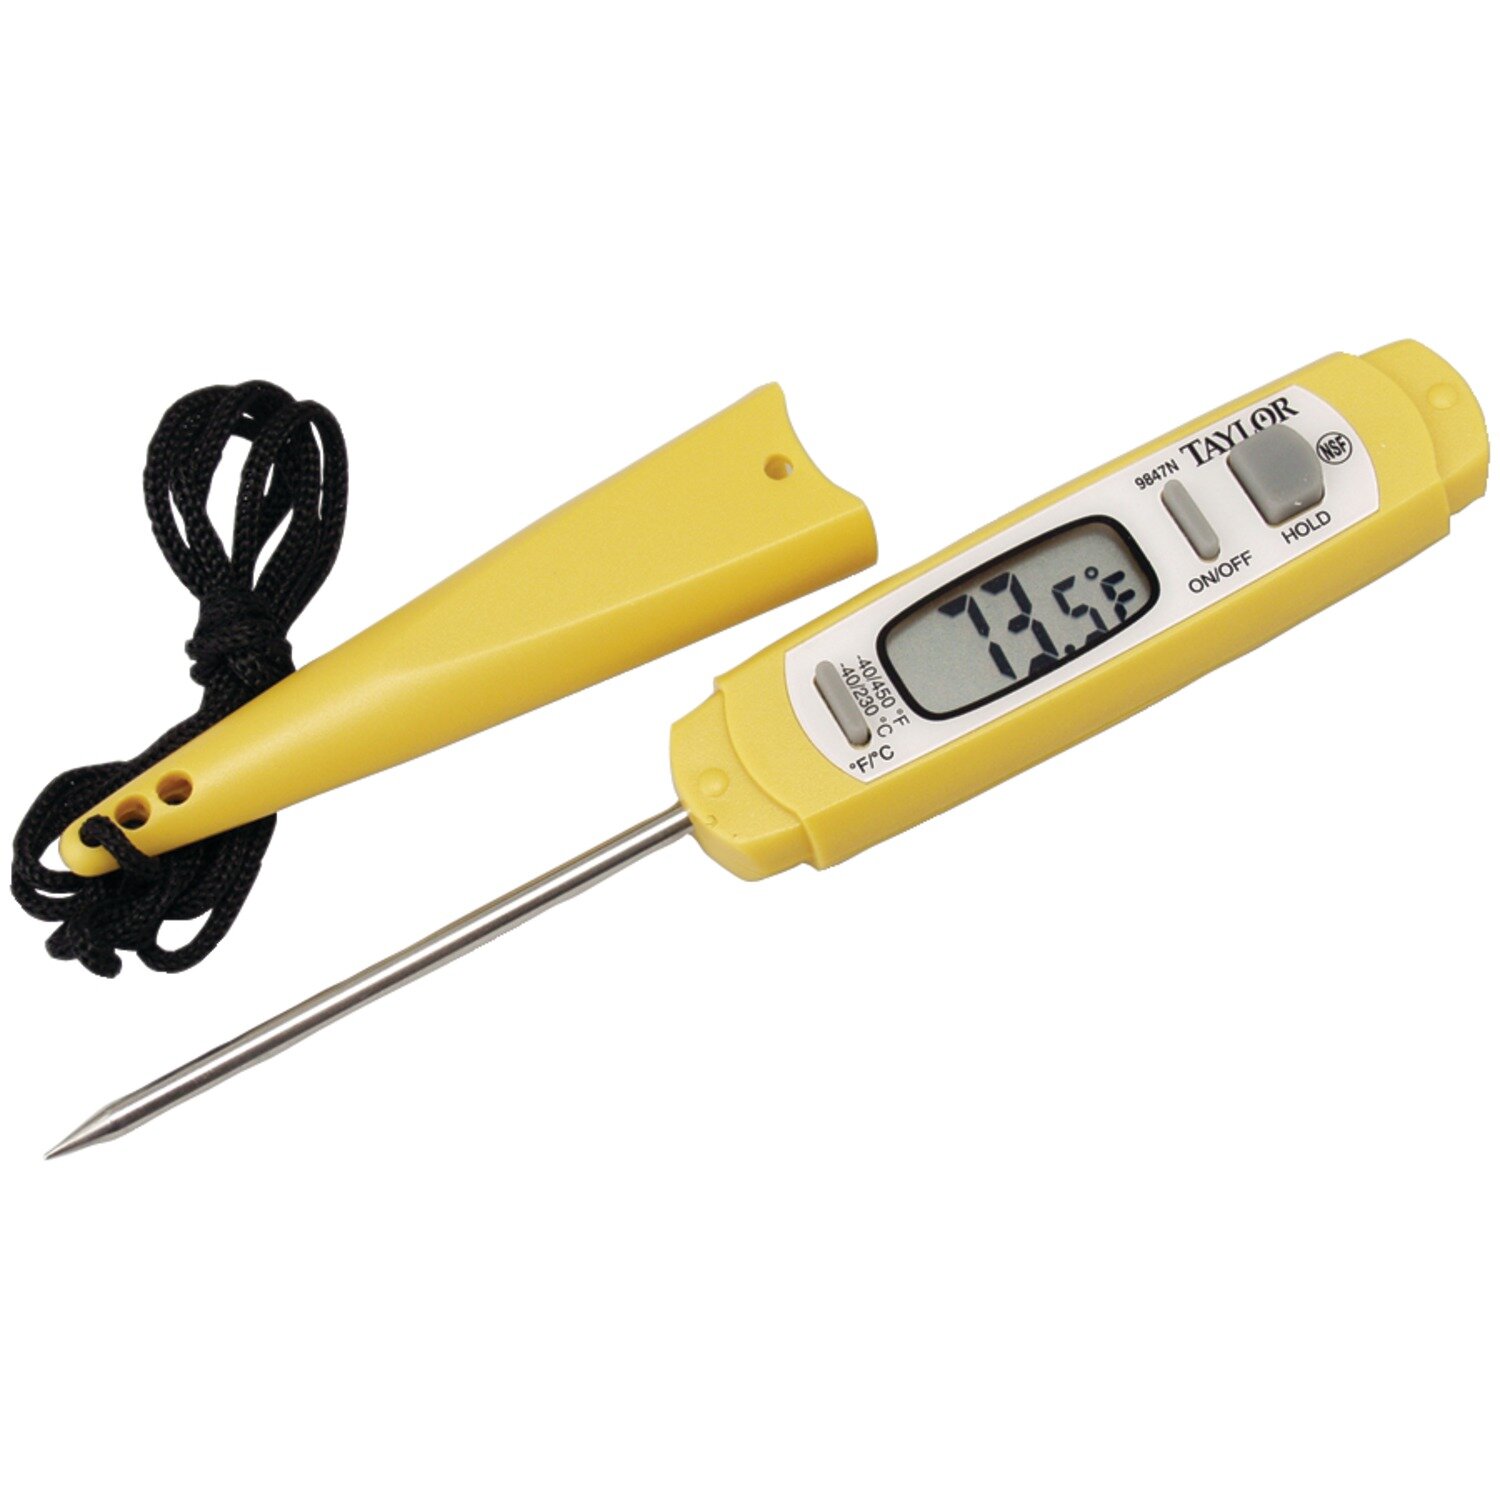 Taylor Instant Read Pocket Kitchen Thermometer